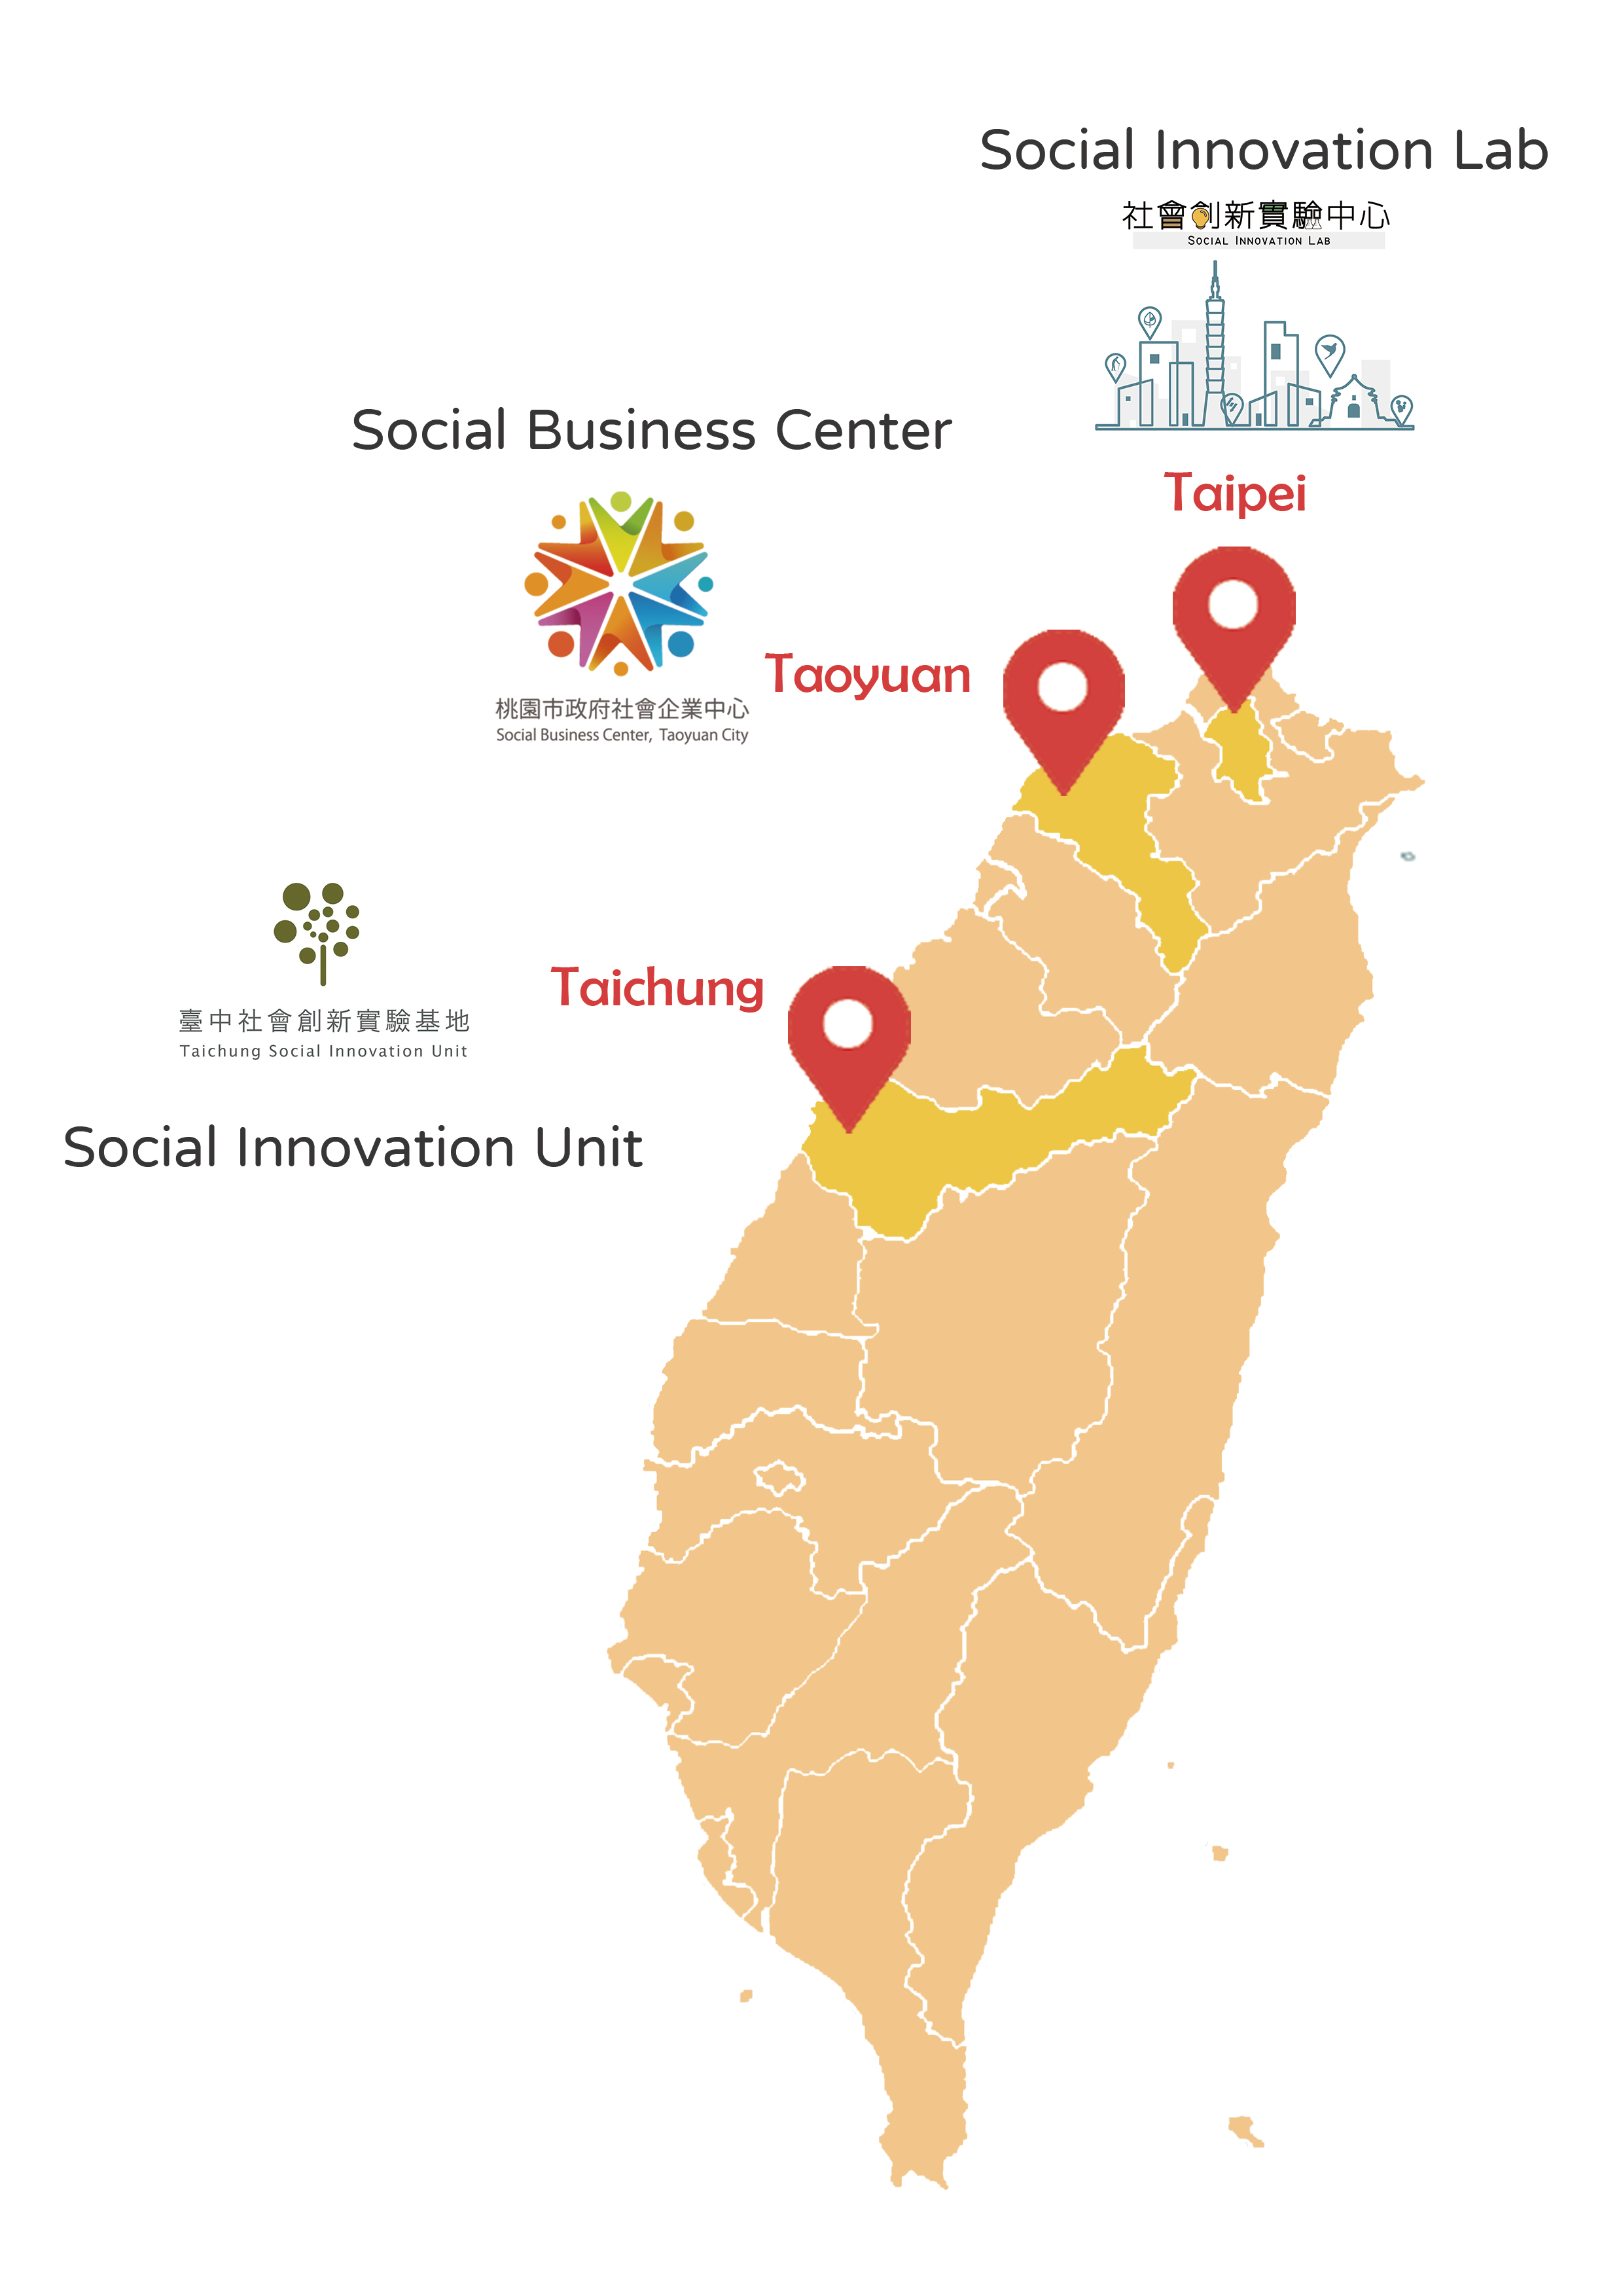 The Social Innovation Center in Taiwan